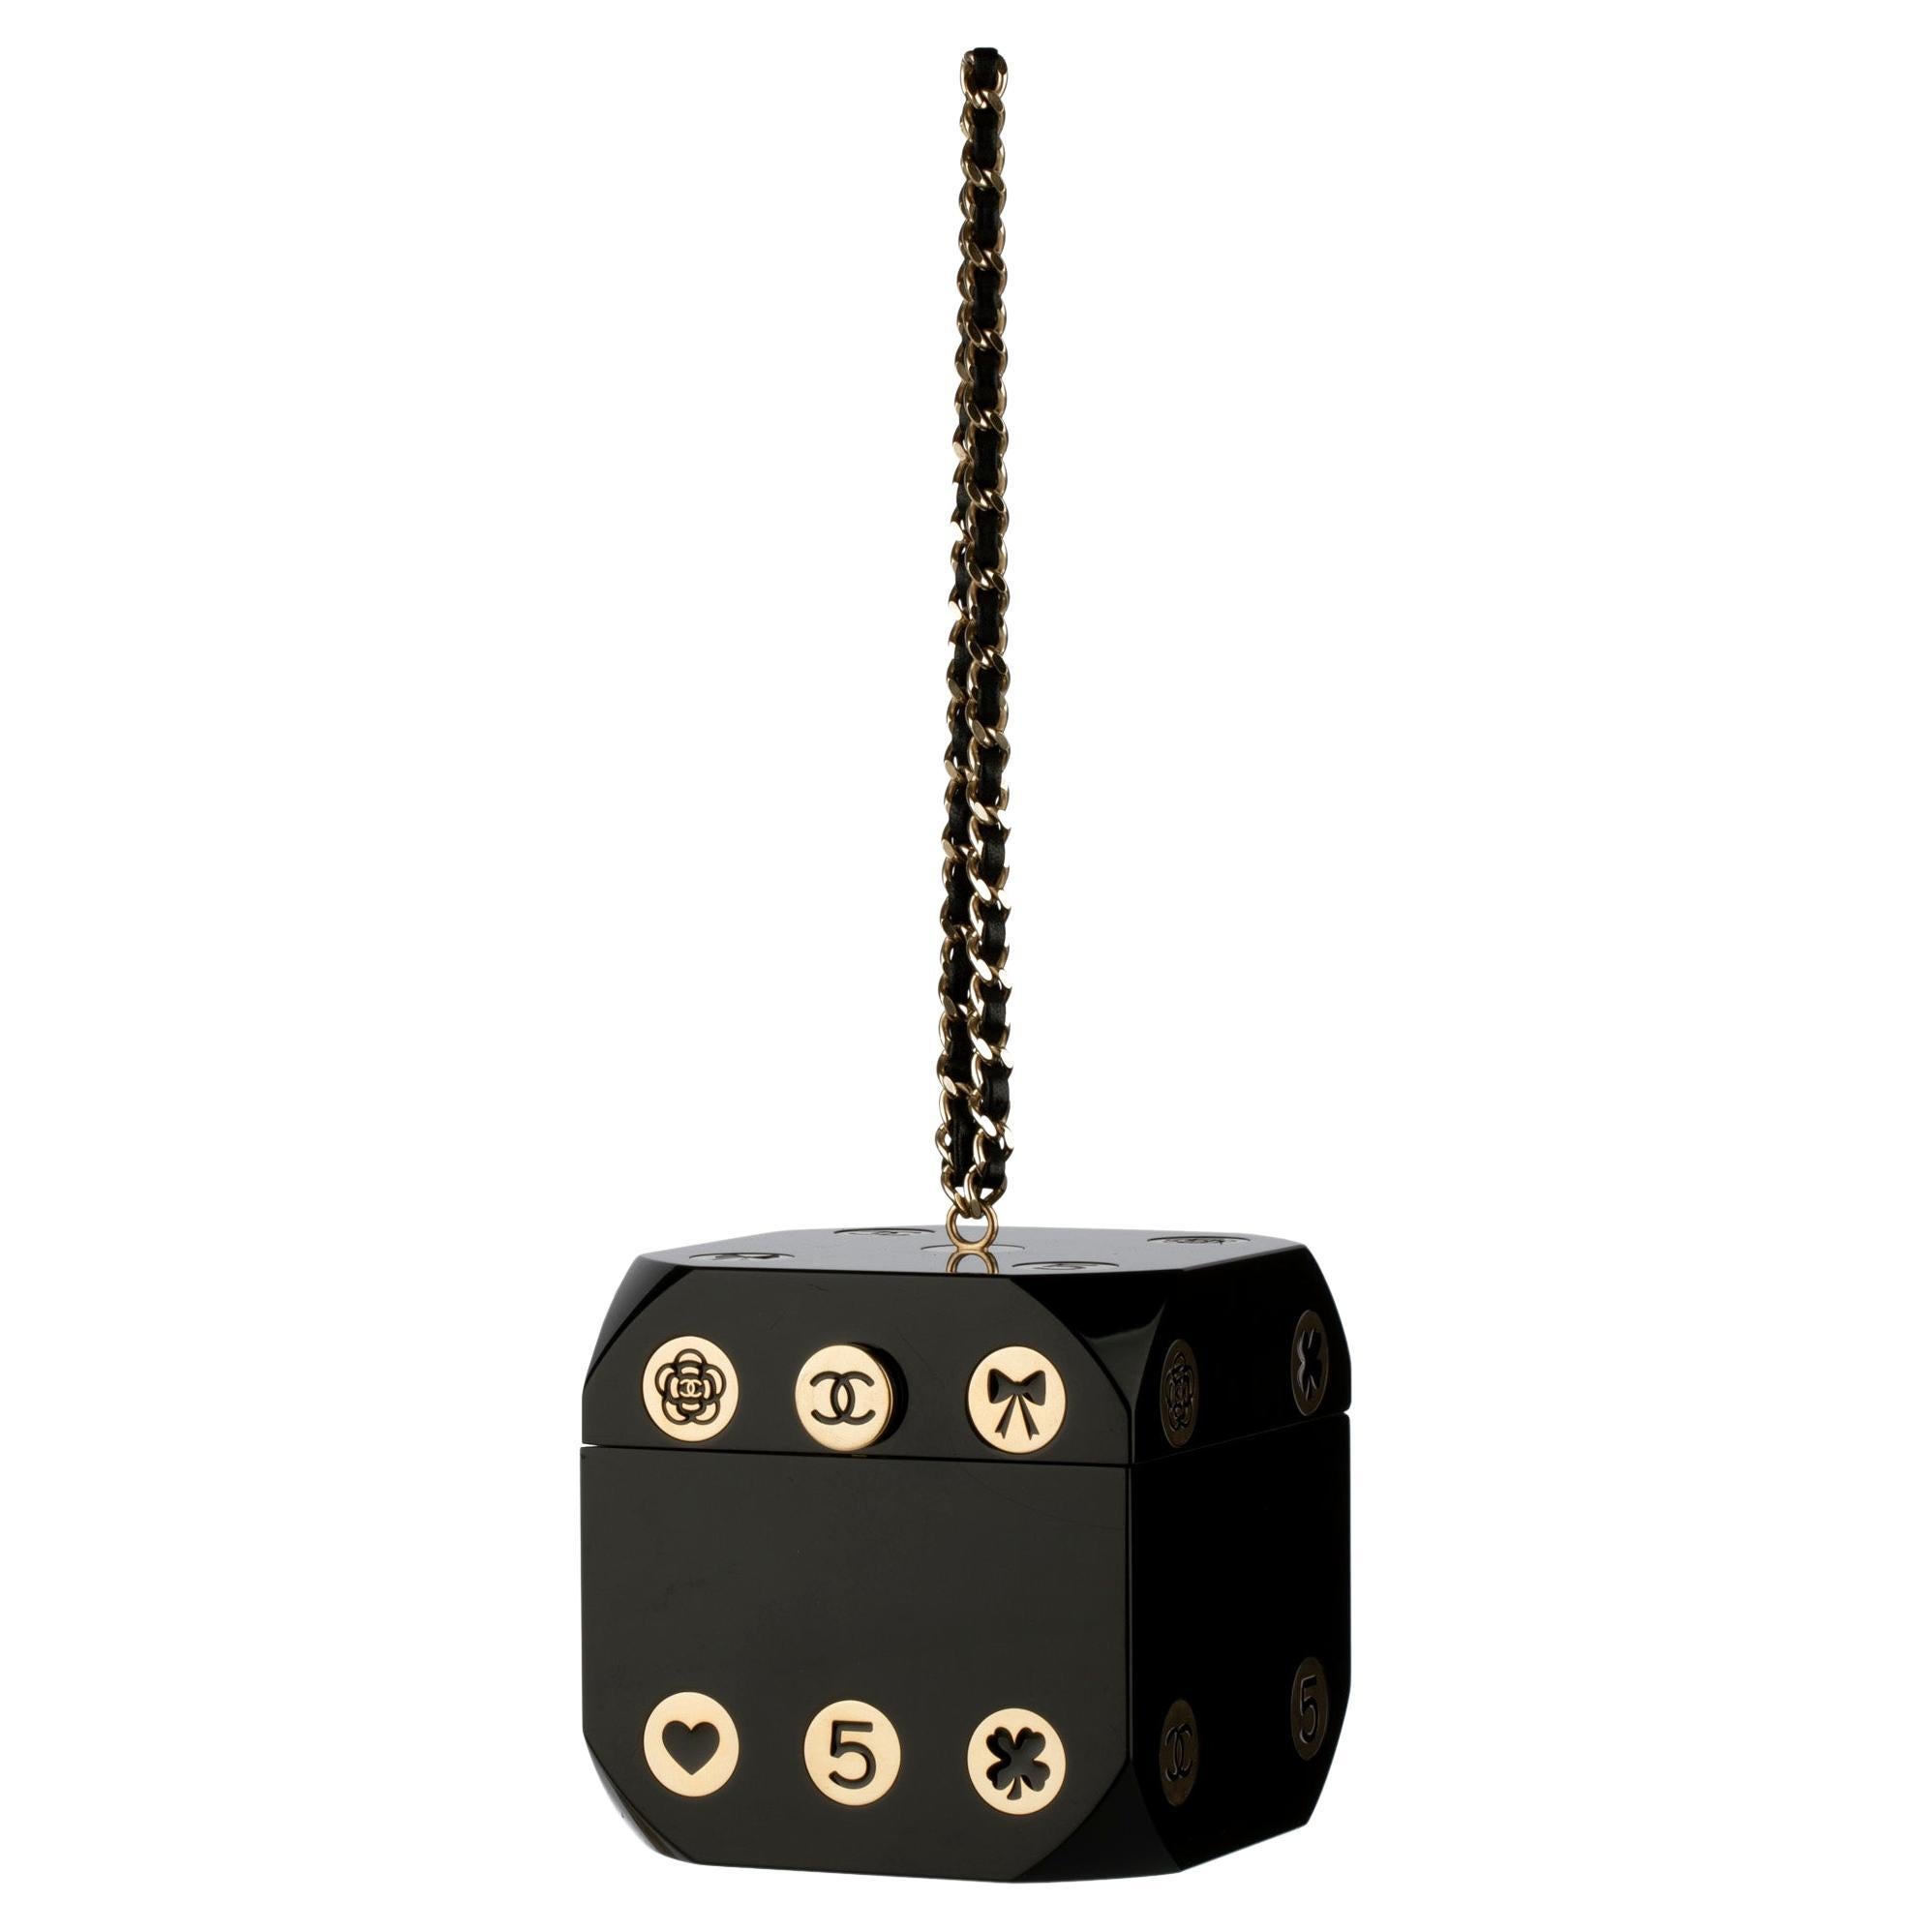 Chanel Minaudière Limited Edition Casino Dice Black Gold-Tone Hardware For Sale